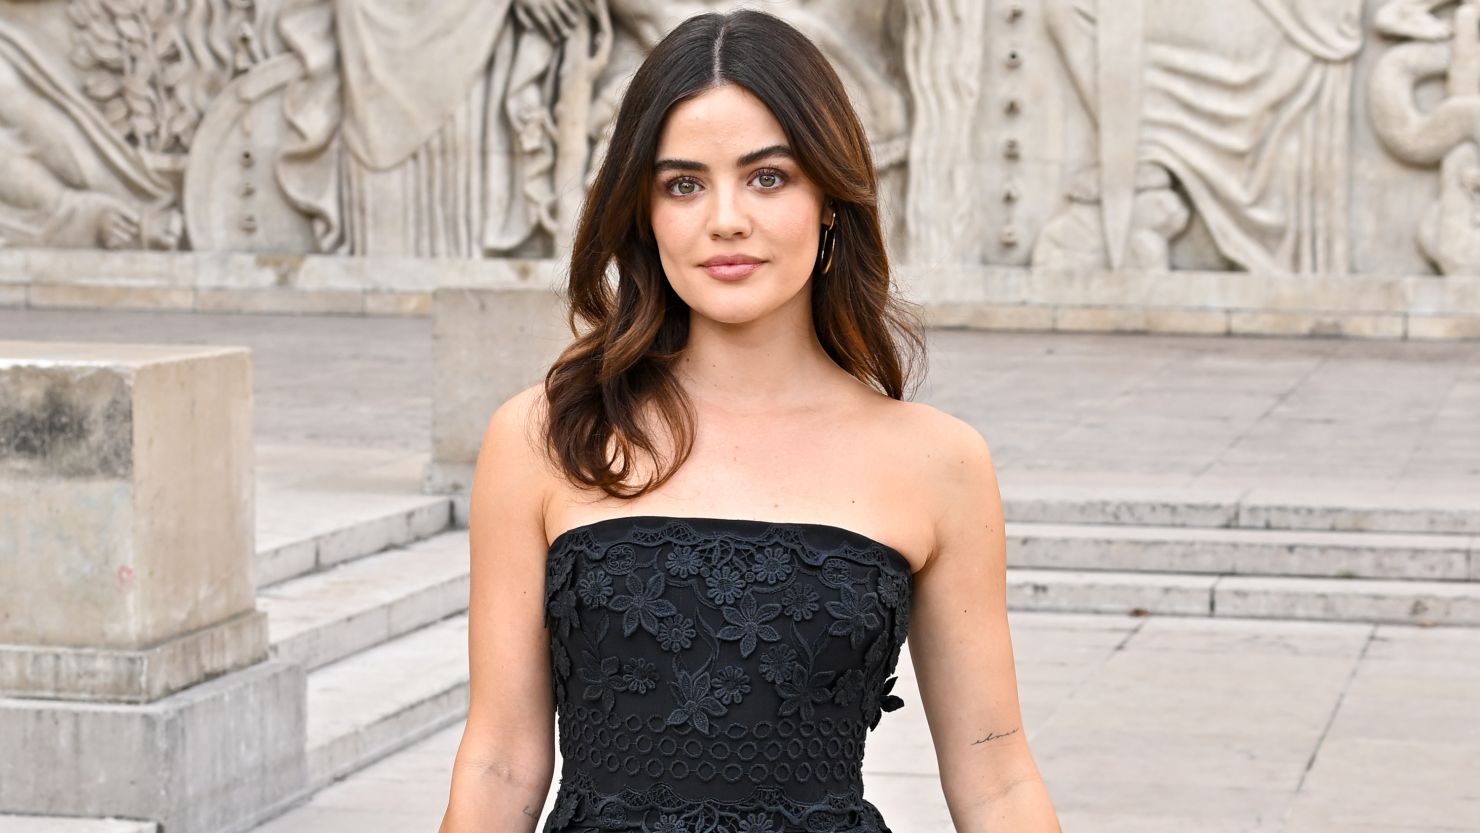 Lucy Hale at Paris Fashion Week in September.